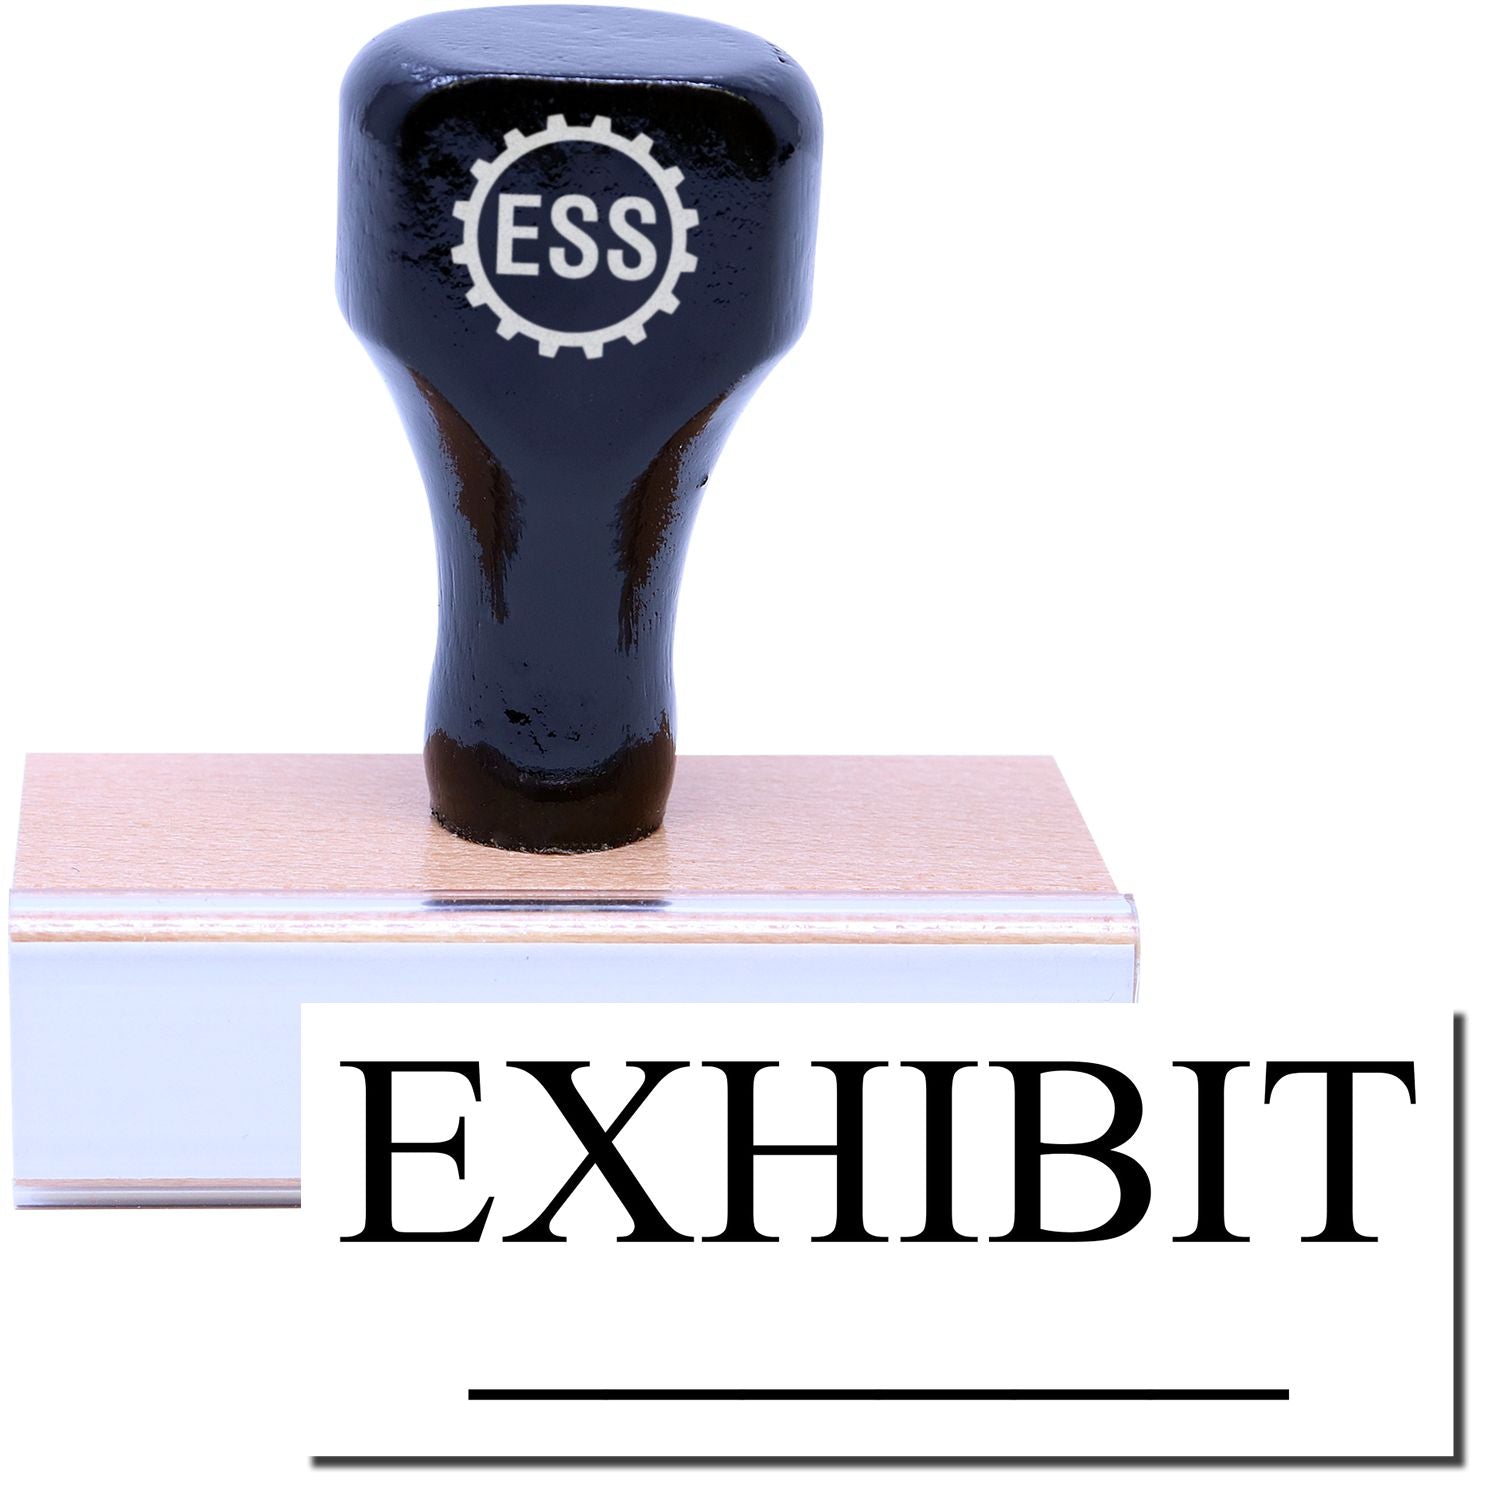 A stock office rubber stamp with a stamped image showing how the text "EXHIBIT" in a large font with a line under it is displayed after stamping.